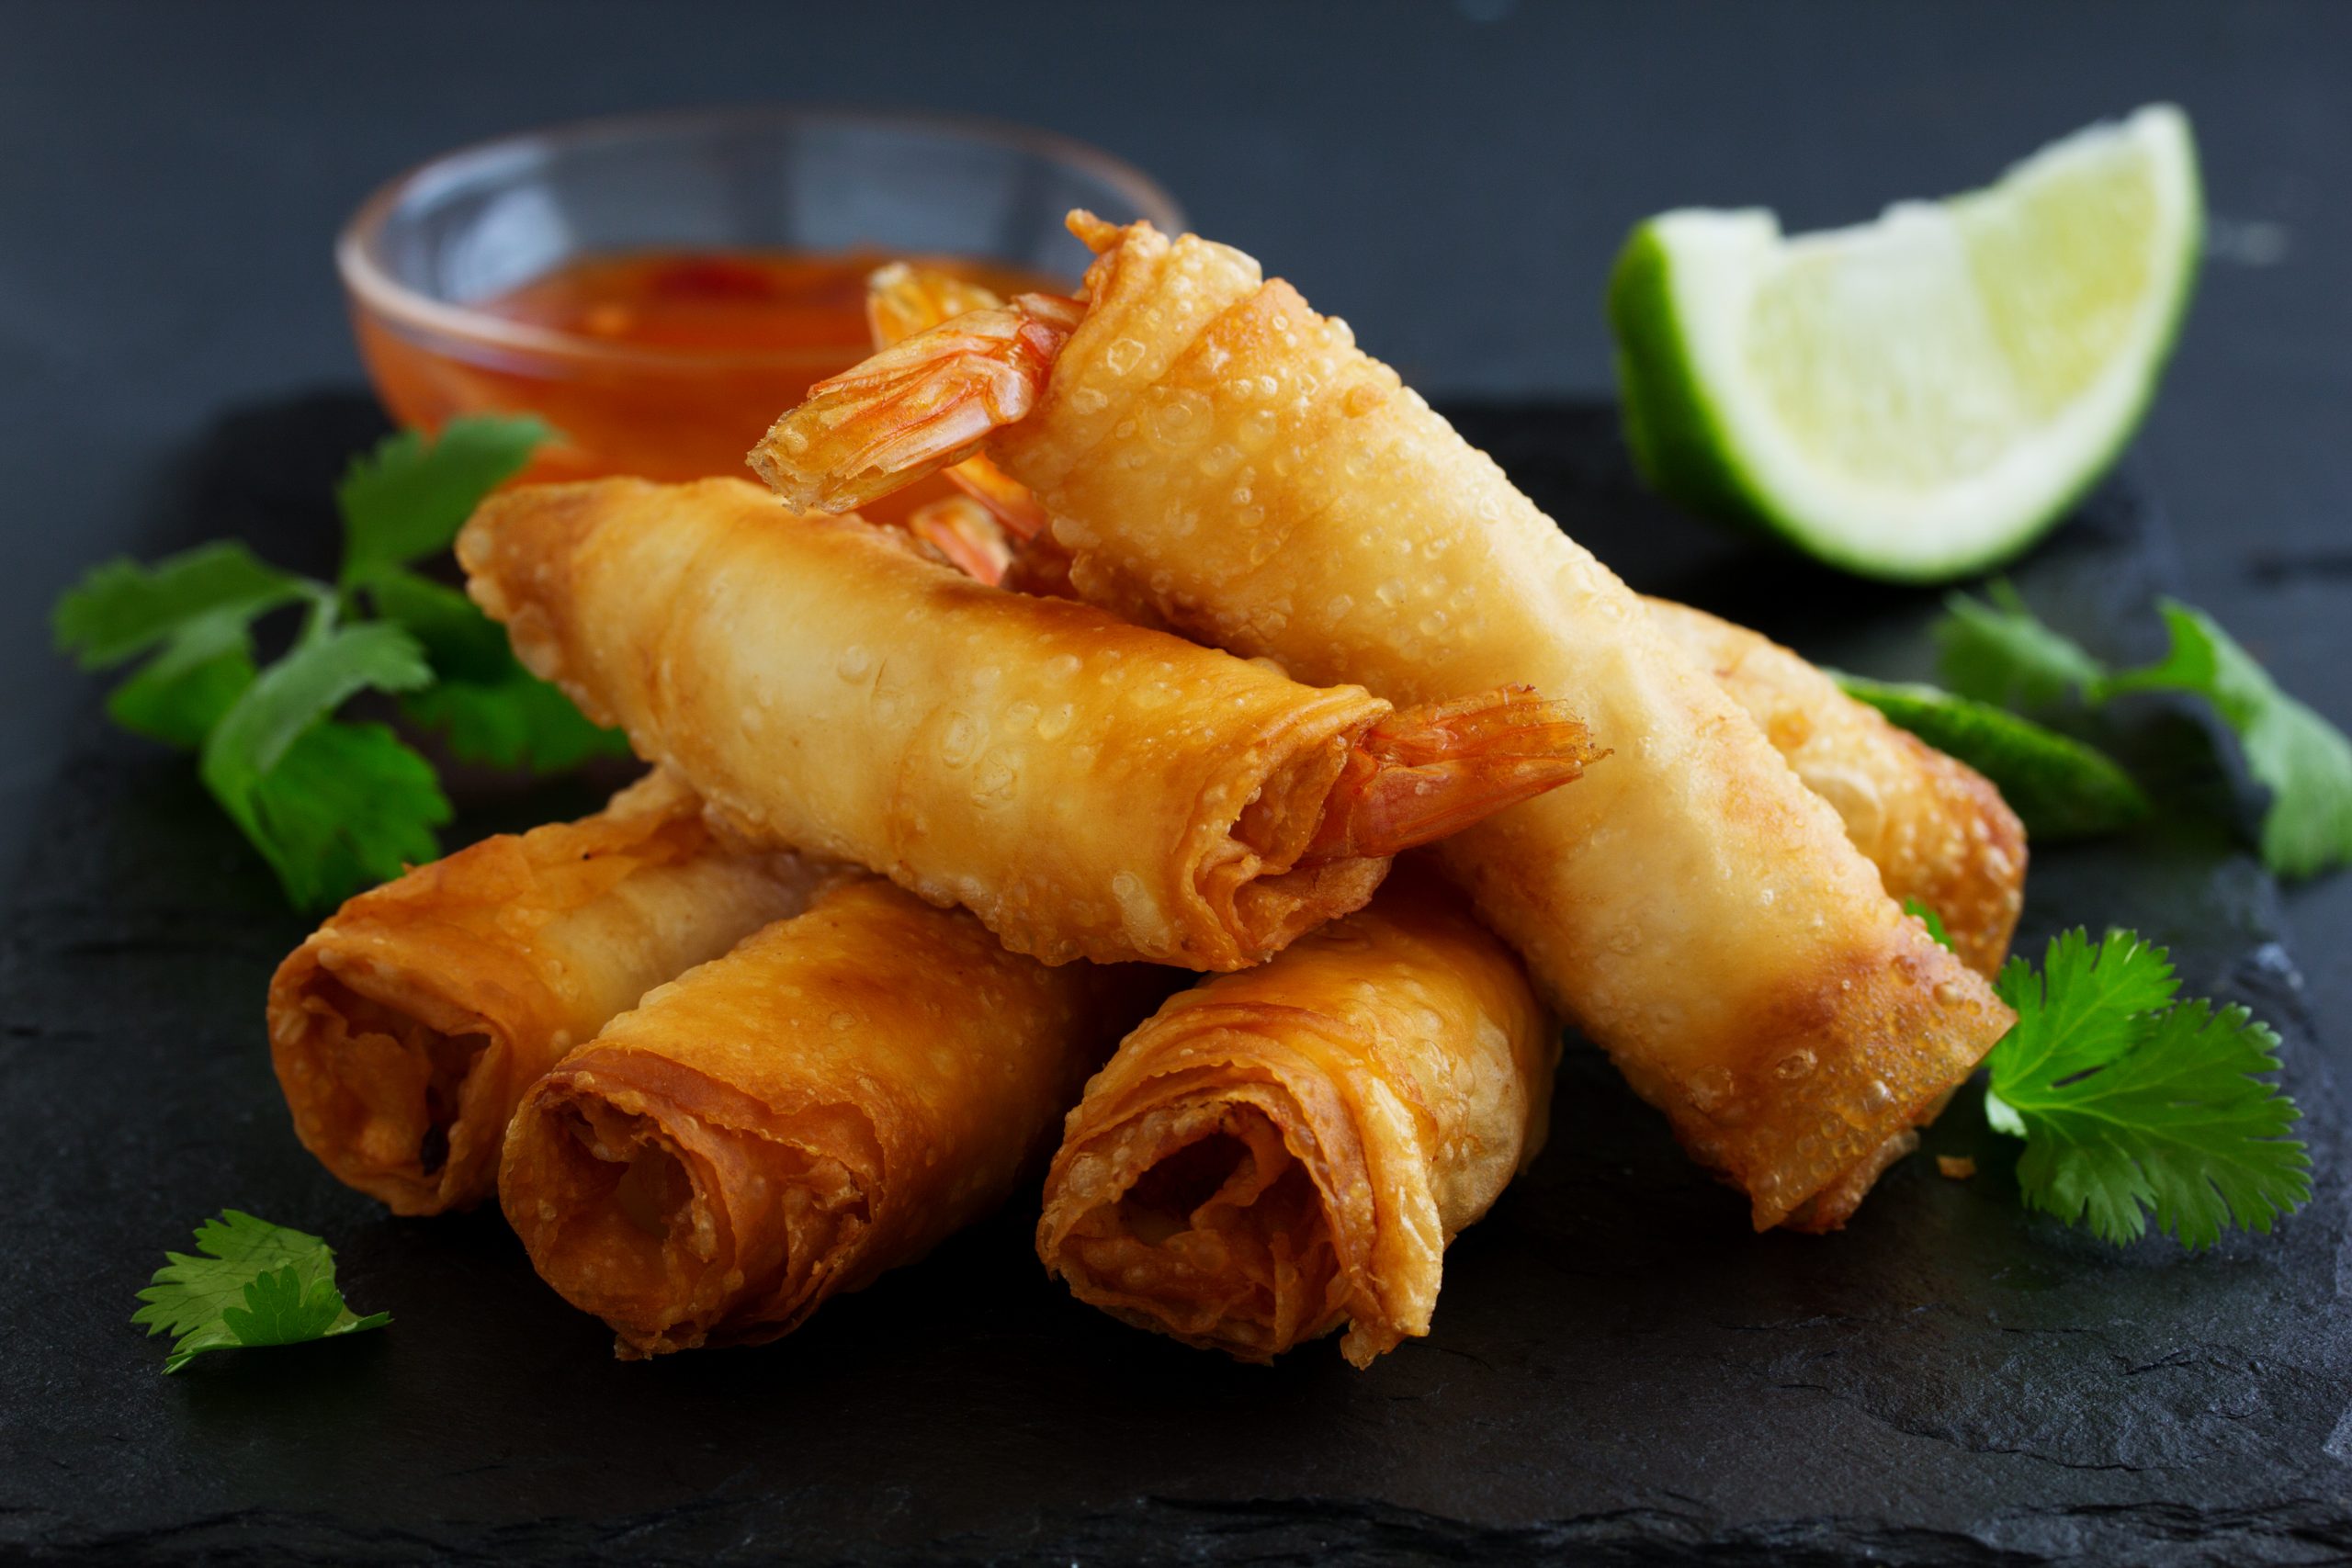 Taste Vietnamese Spring Rolls During The Market And Cooking Experience In Da Nang